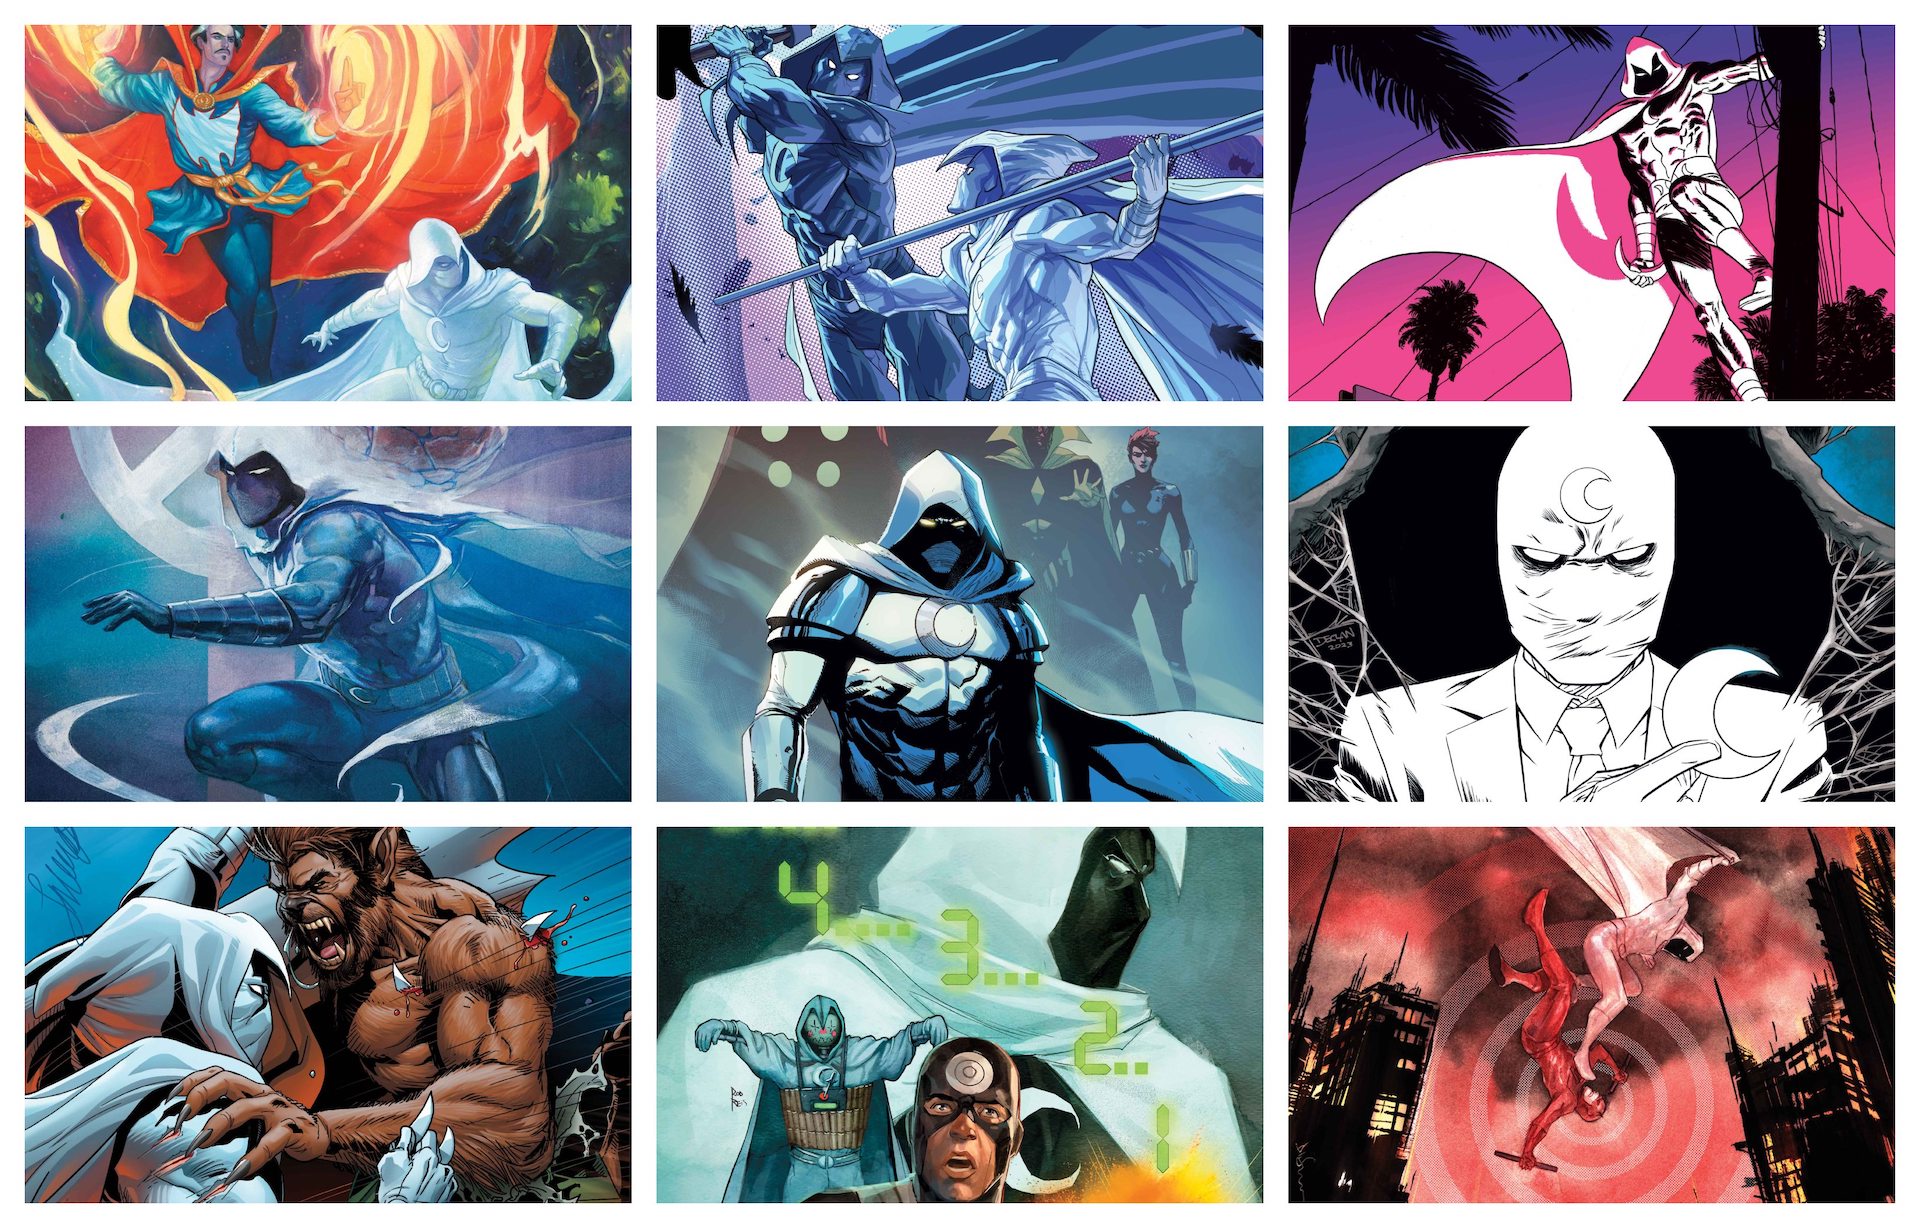 'Knight’s End' variant covers celebrate the death of Moon Knight